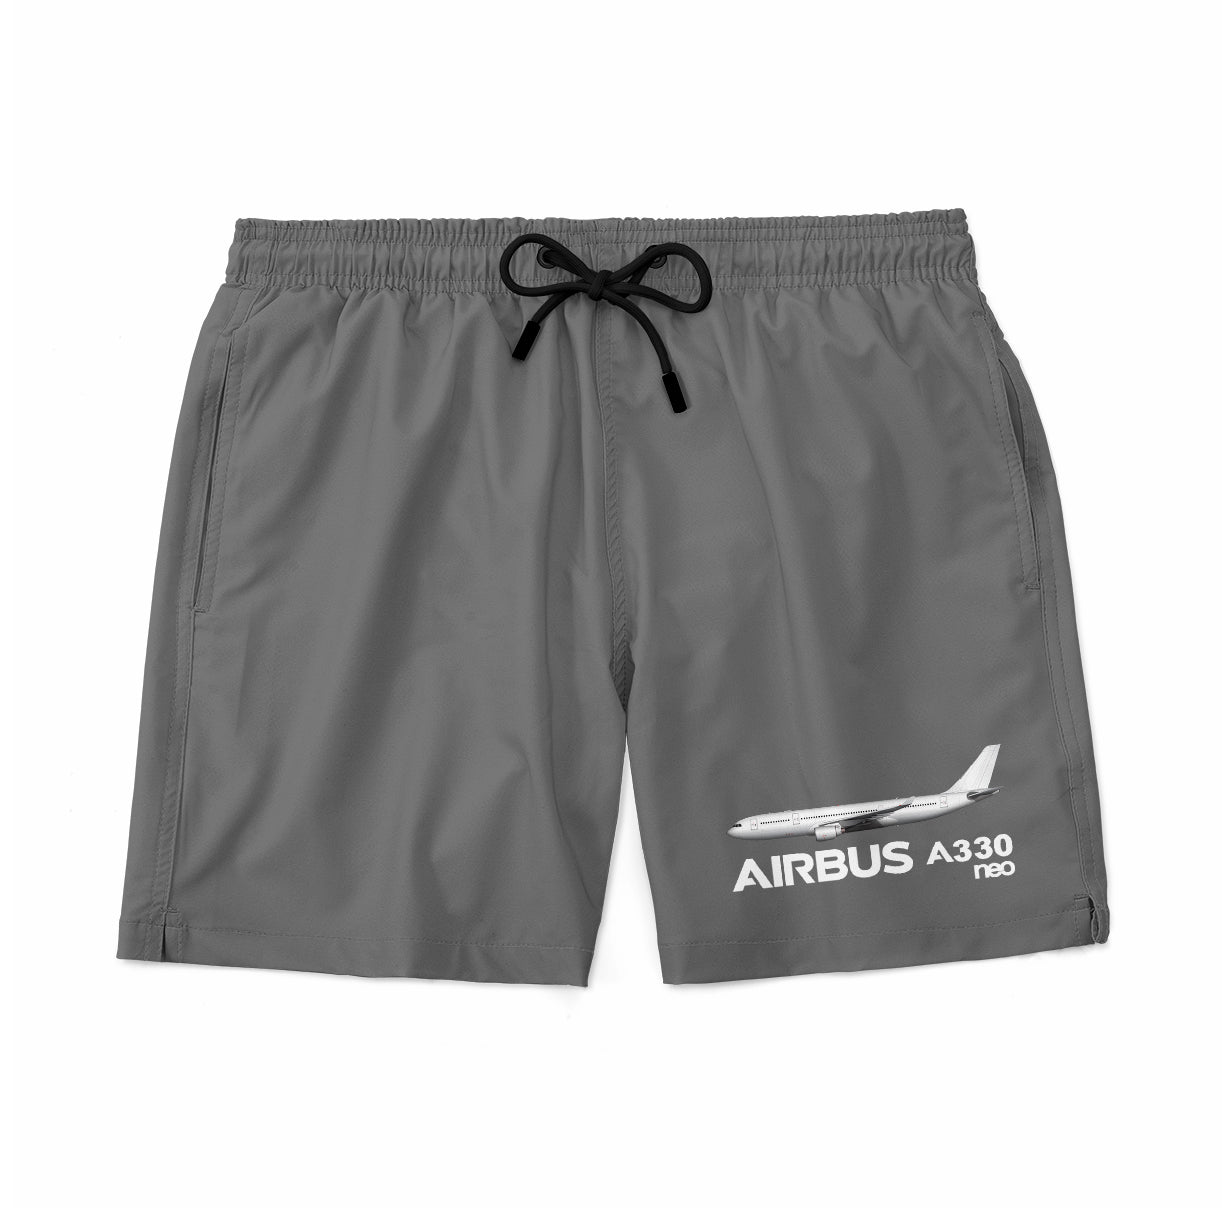 The Airbus A330neo Designed Swim Trunks & Shorts